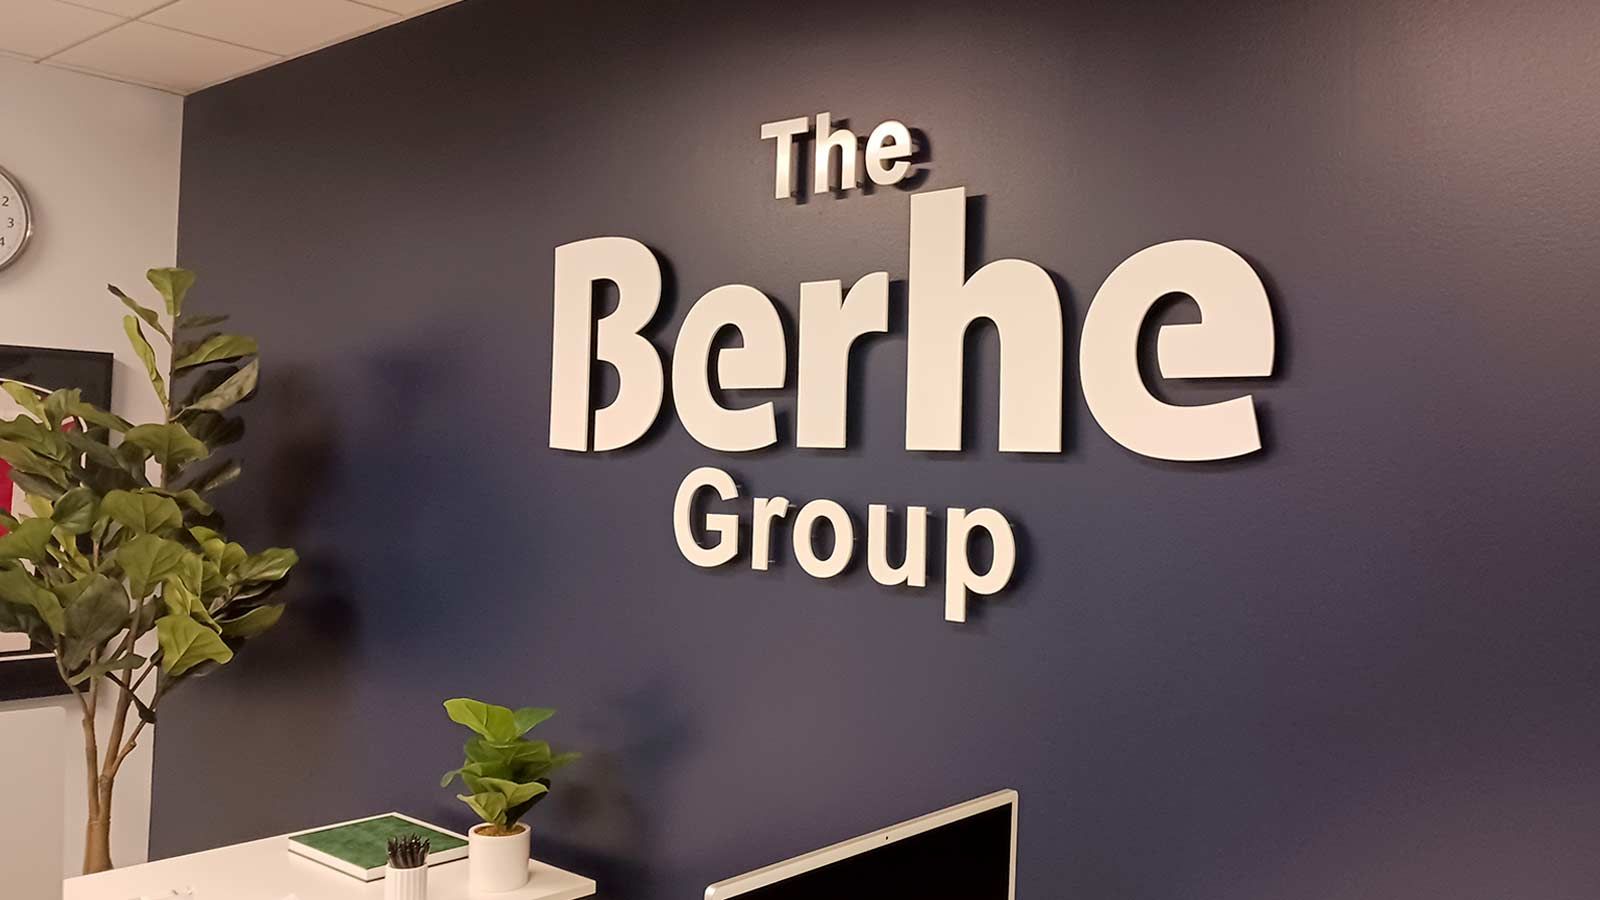 The Berhe Group interior sign mounted on the wall